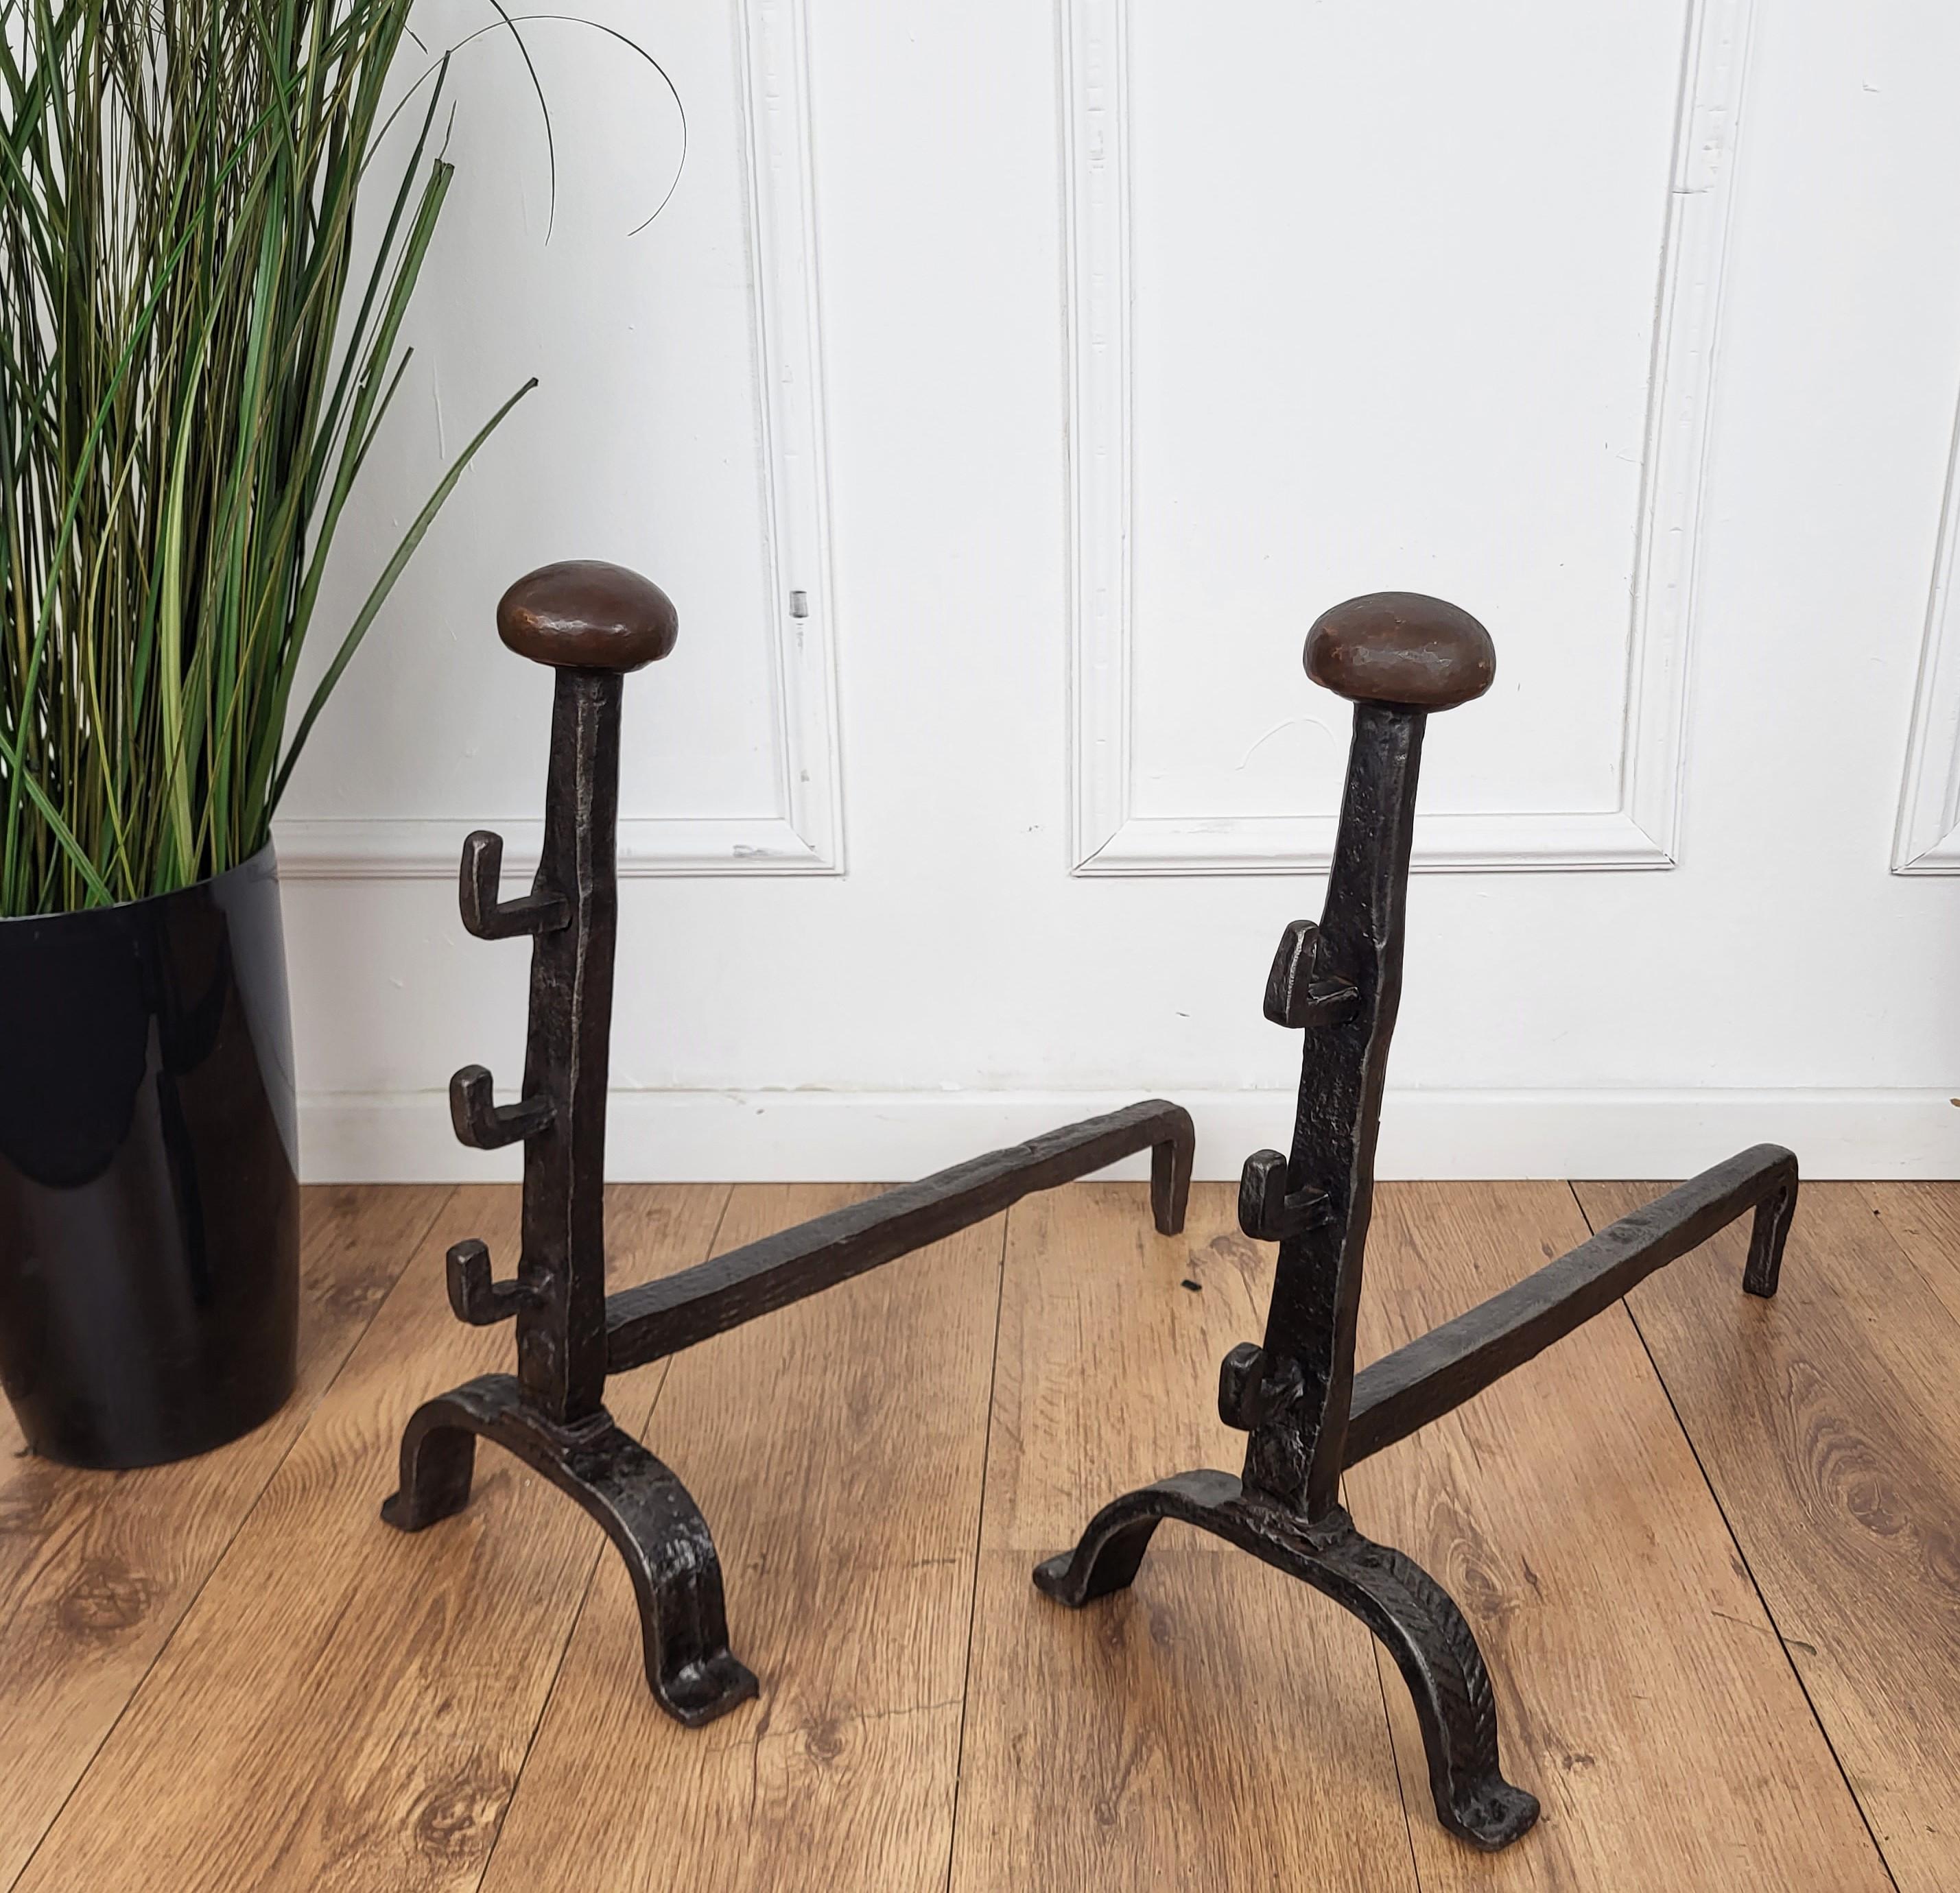 Antique wrought iron Italian andirons log holder, having two beautiful classic shapes with the great handmade craftmanship typical for wrought-iron and the back pillars.